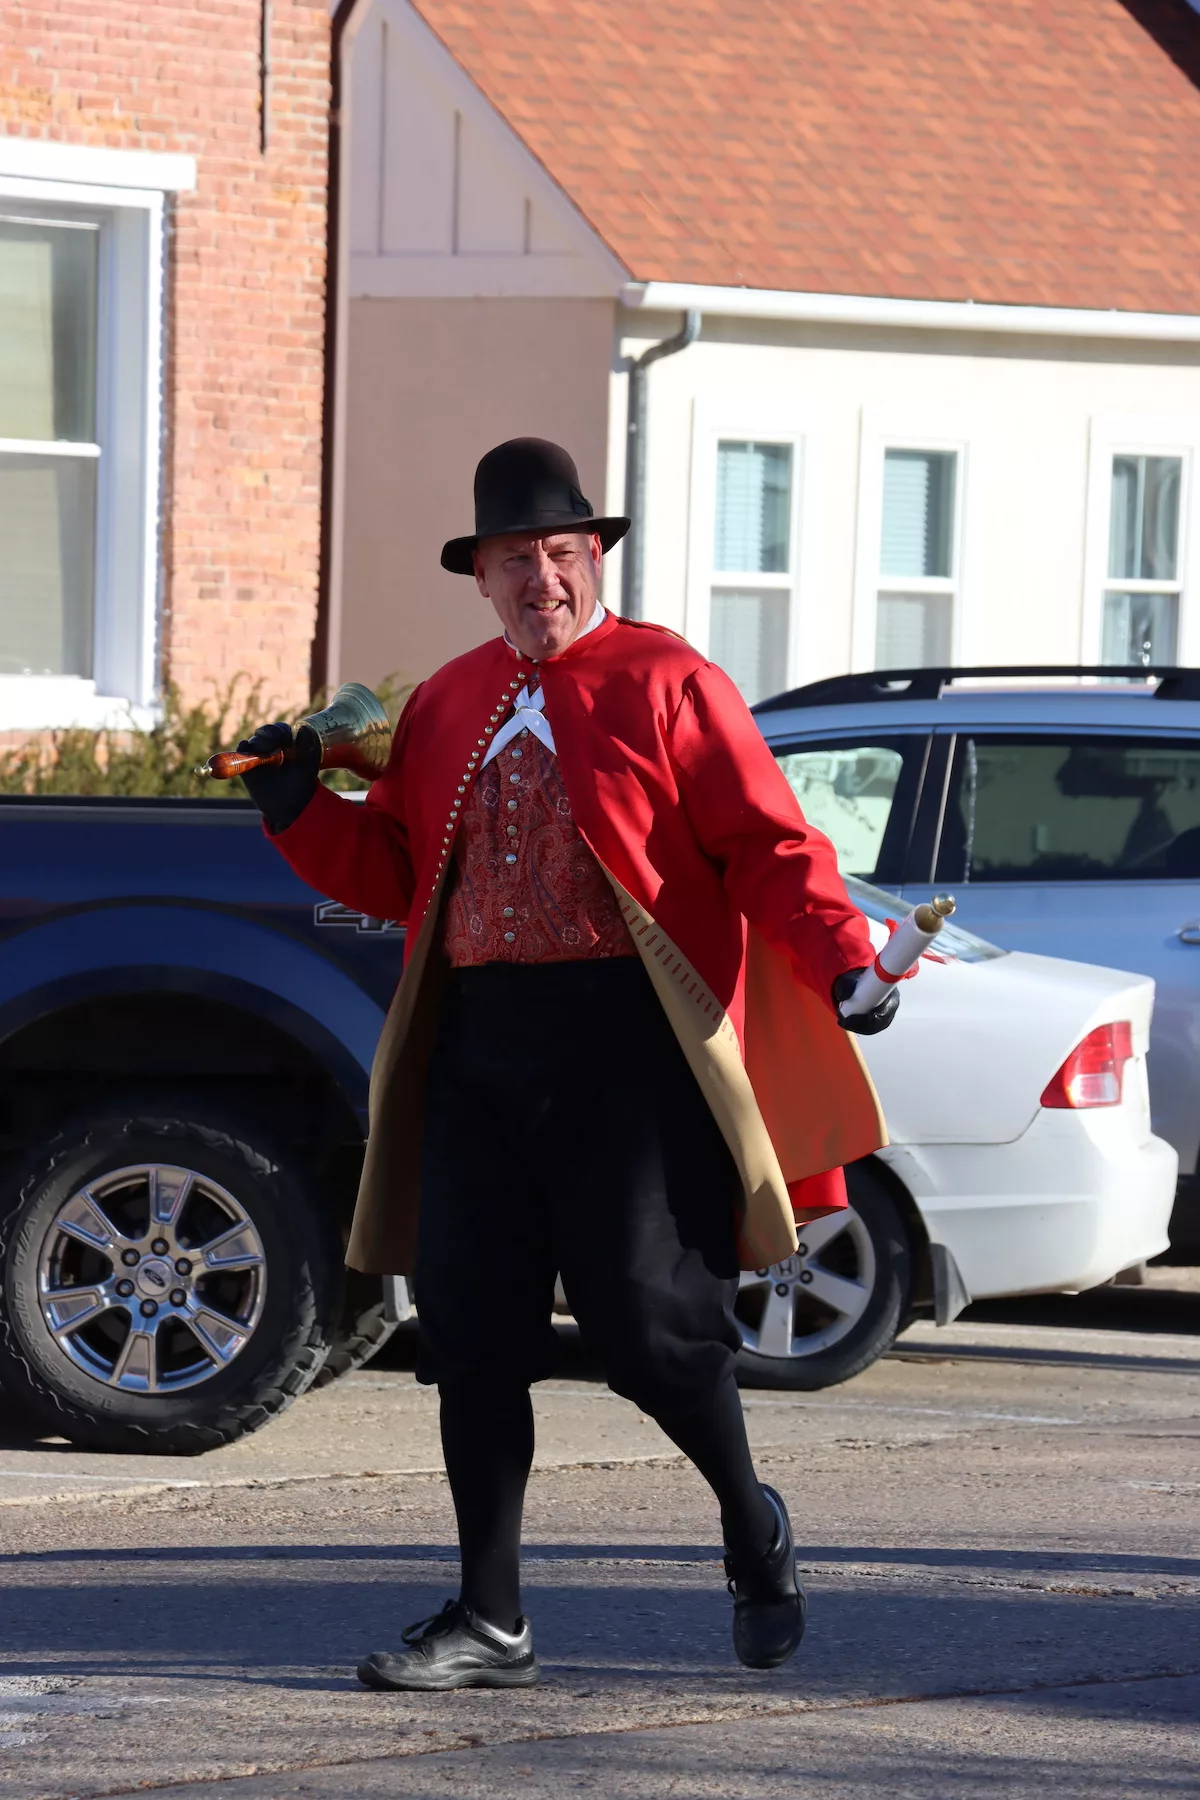 Town crier ringing a bell during parade at Christmas in Pella, Iowa